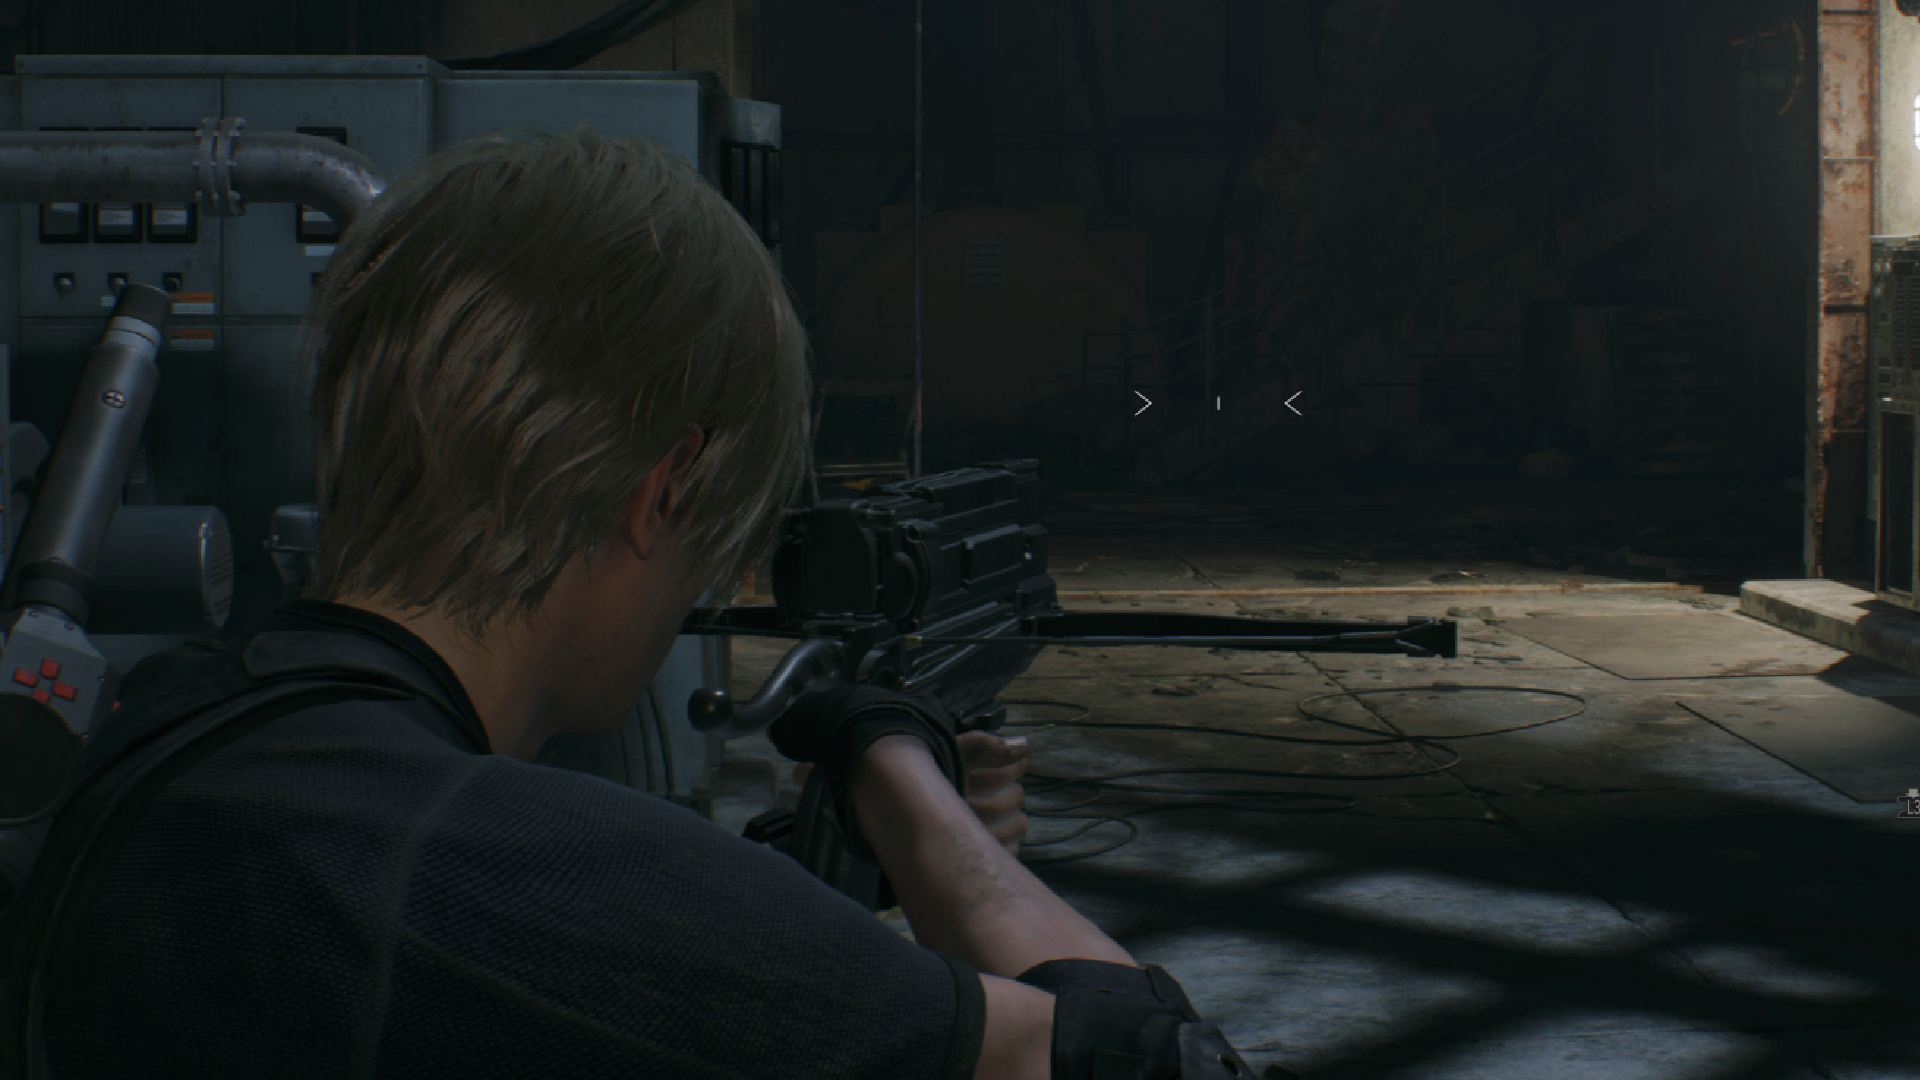 Resident Evil 4 Bolt Thrower: Leon can be seen aiming the bolt thrower